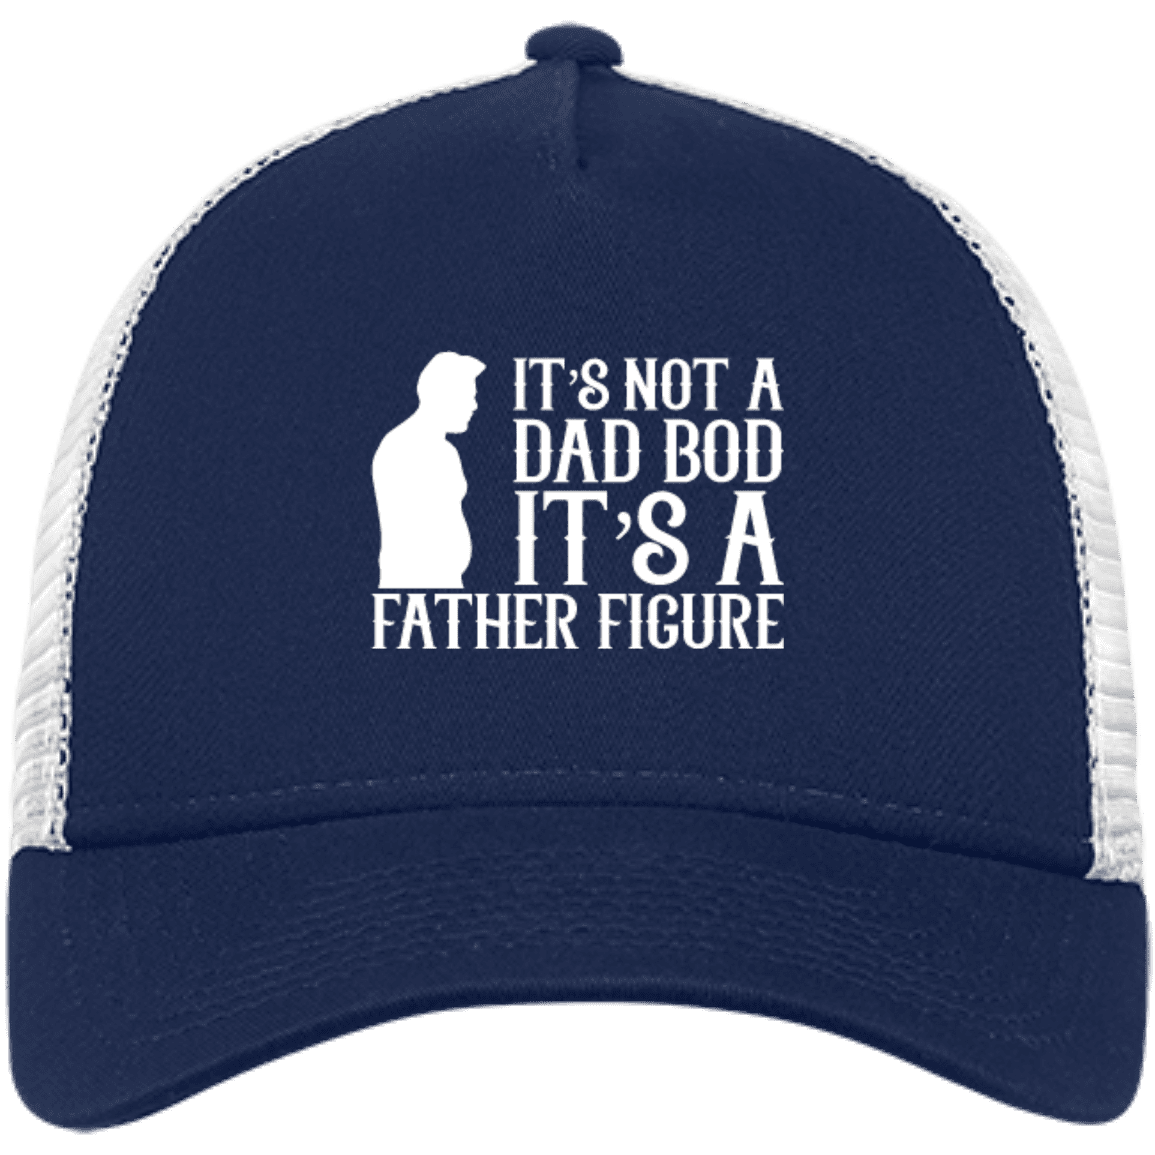 Custom Baseball Cap Id Rather Be Farming White Embroidery Cotton Soft Mesh Cap Snapback Black Charcoal Personalized Text Here